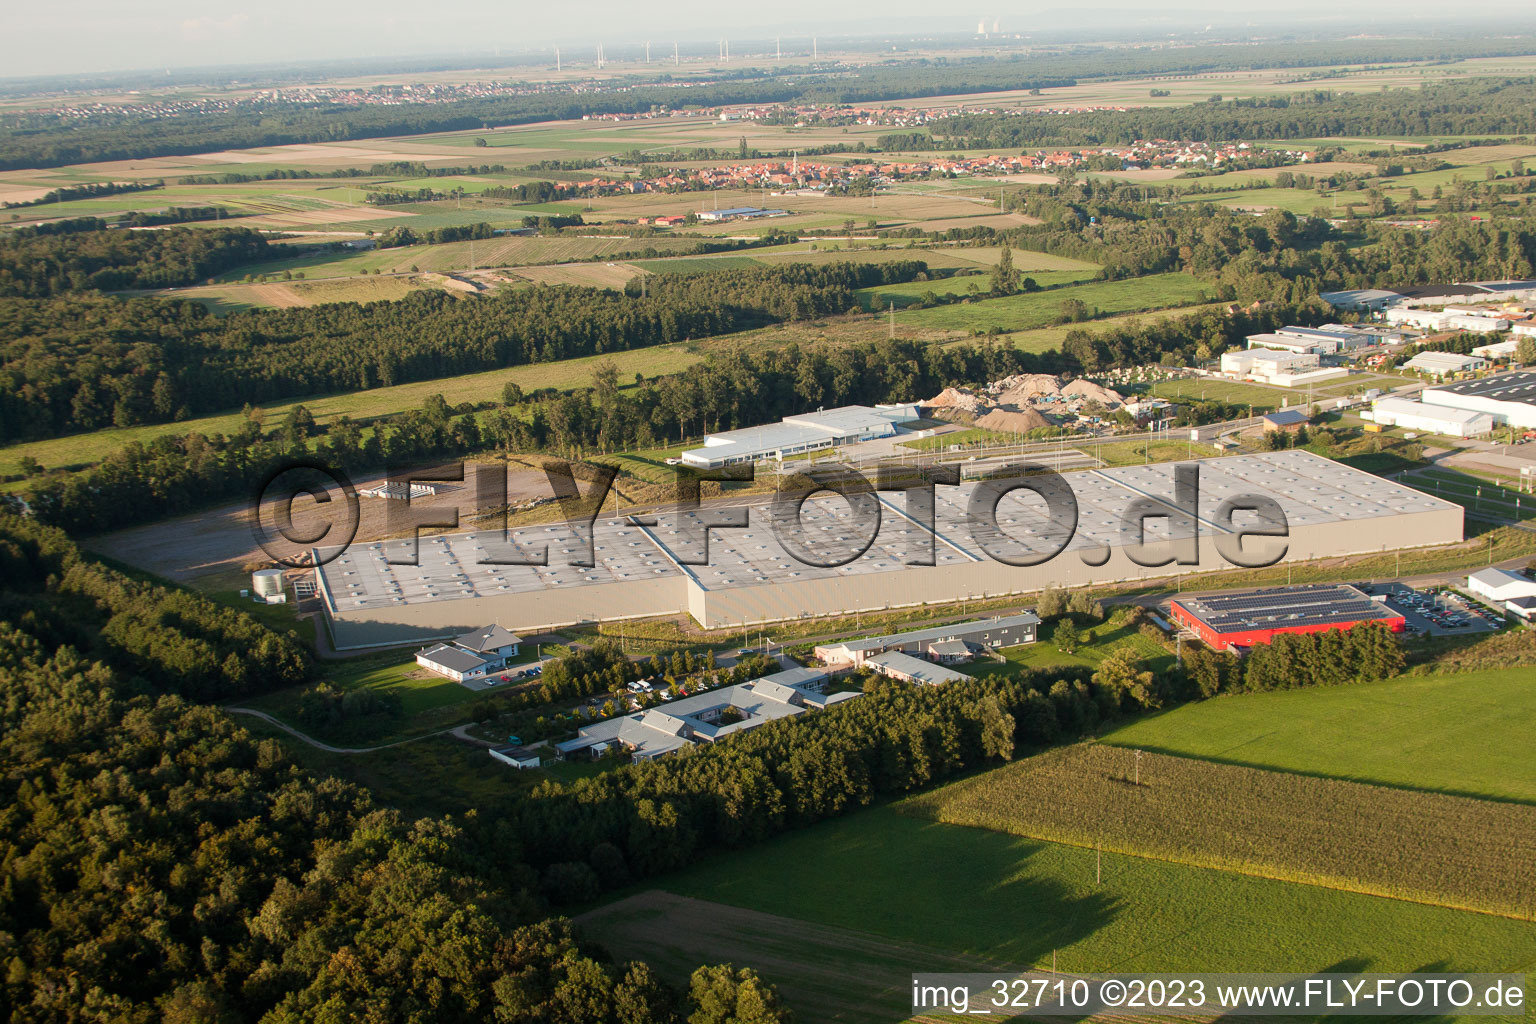 Aerial view of Horst industrial area, Gazely logistics center in the district Minderslachen in Kandel in the state Rhineland-Palatinate, Germany